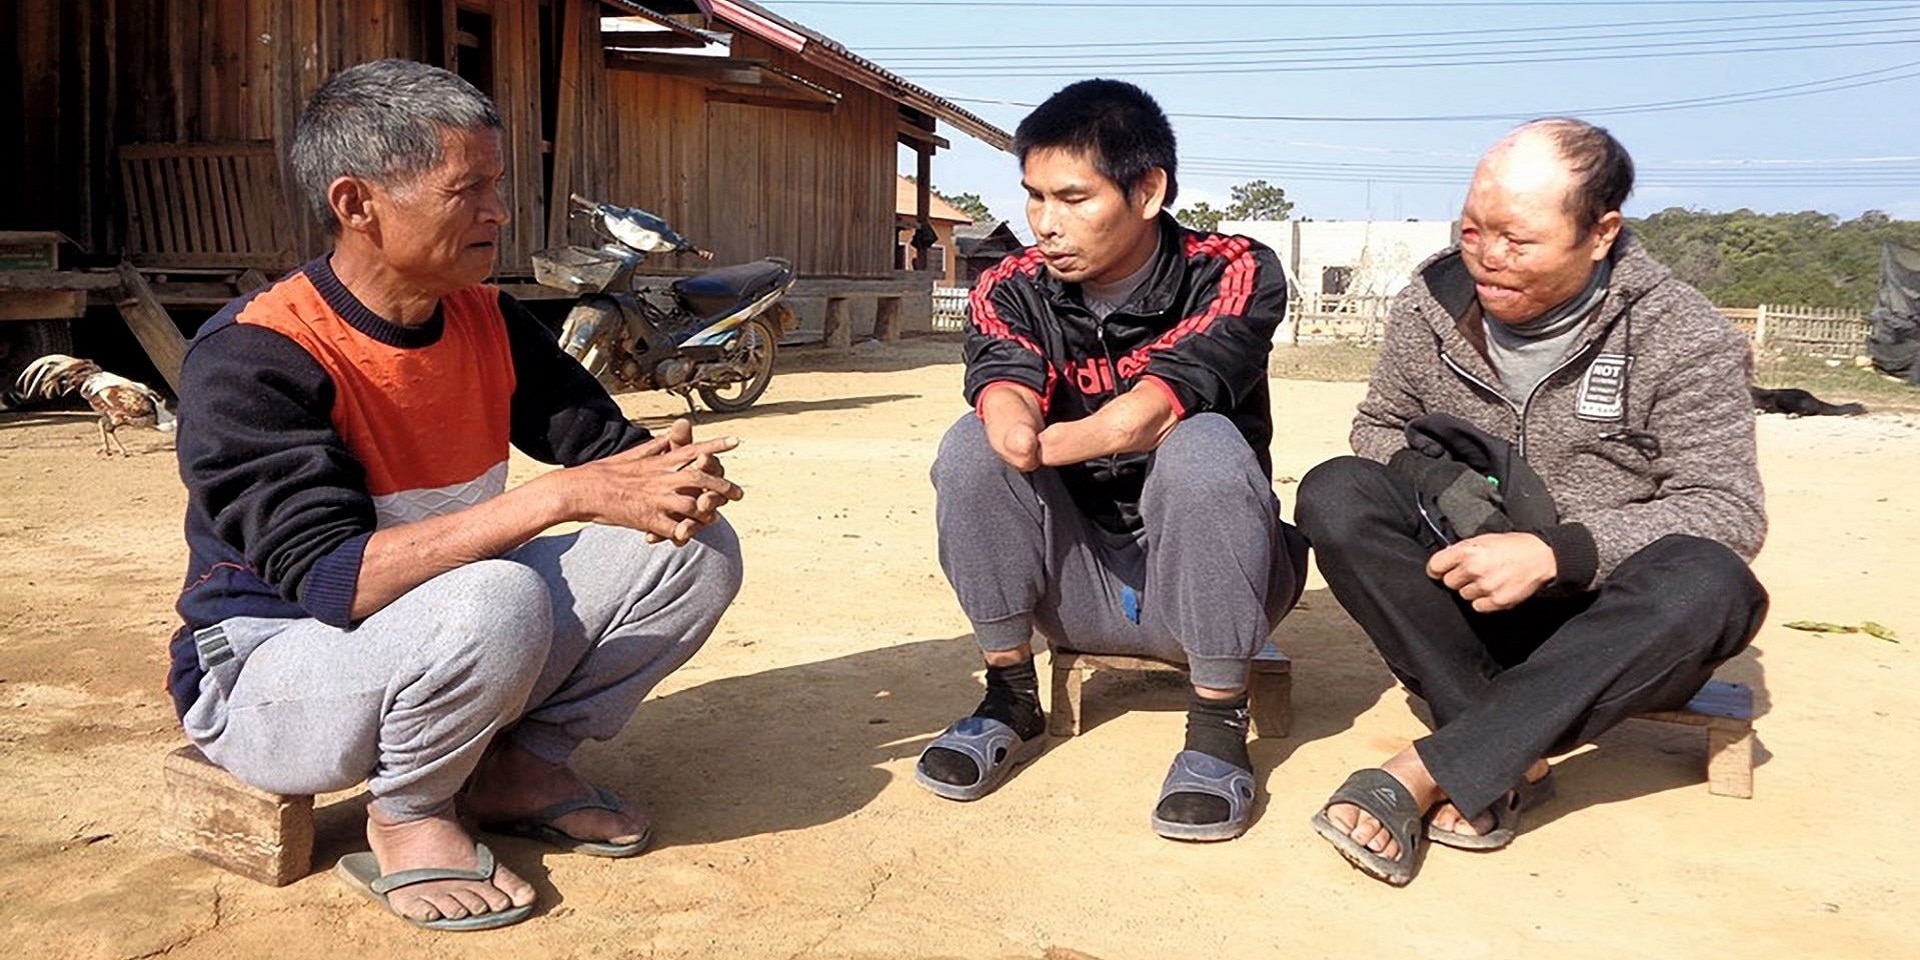 Three Lao cluster munition victims sit on the ground in front of a farmhouse.